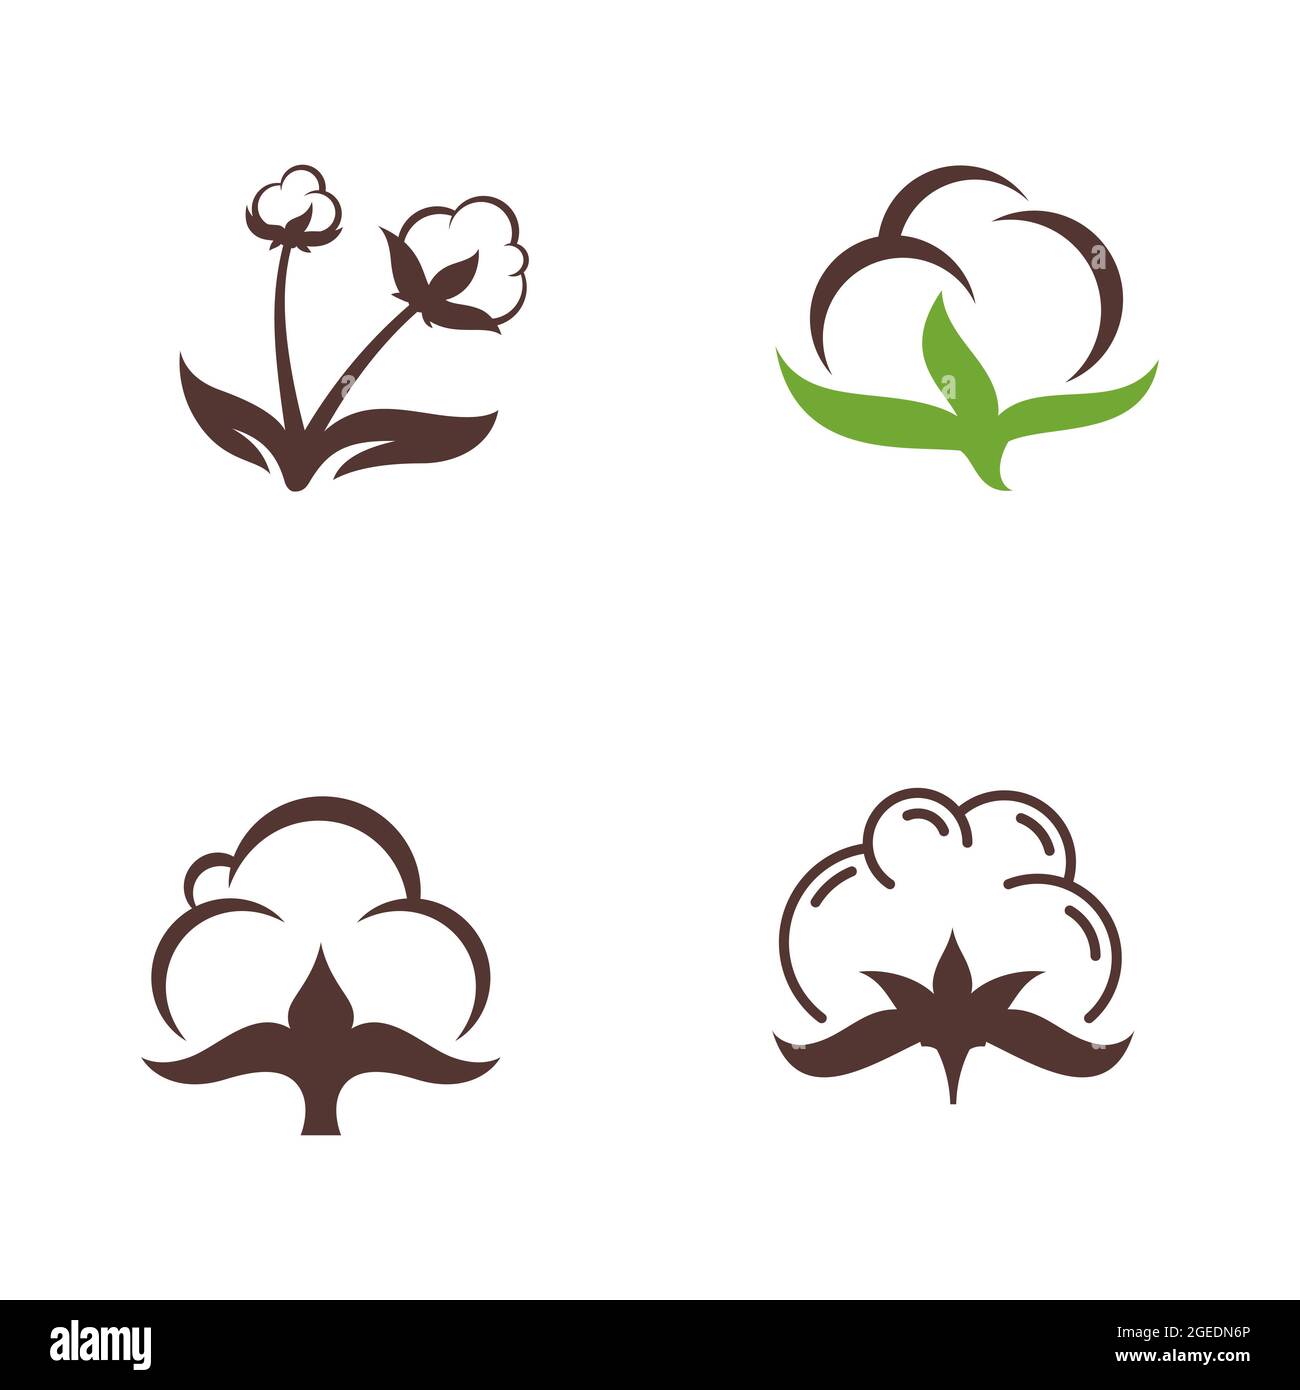 Cotton flower vector icon template symbol nature Stock Photo - Alamy